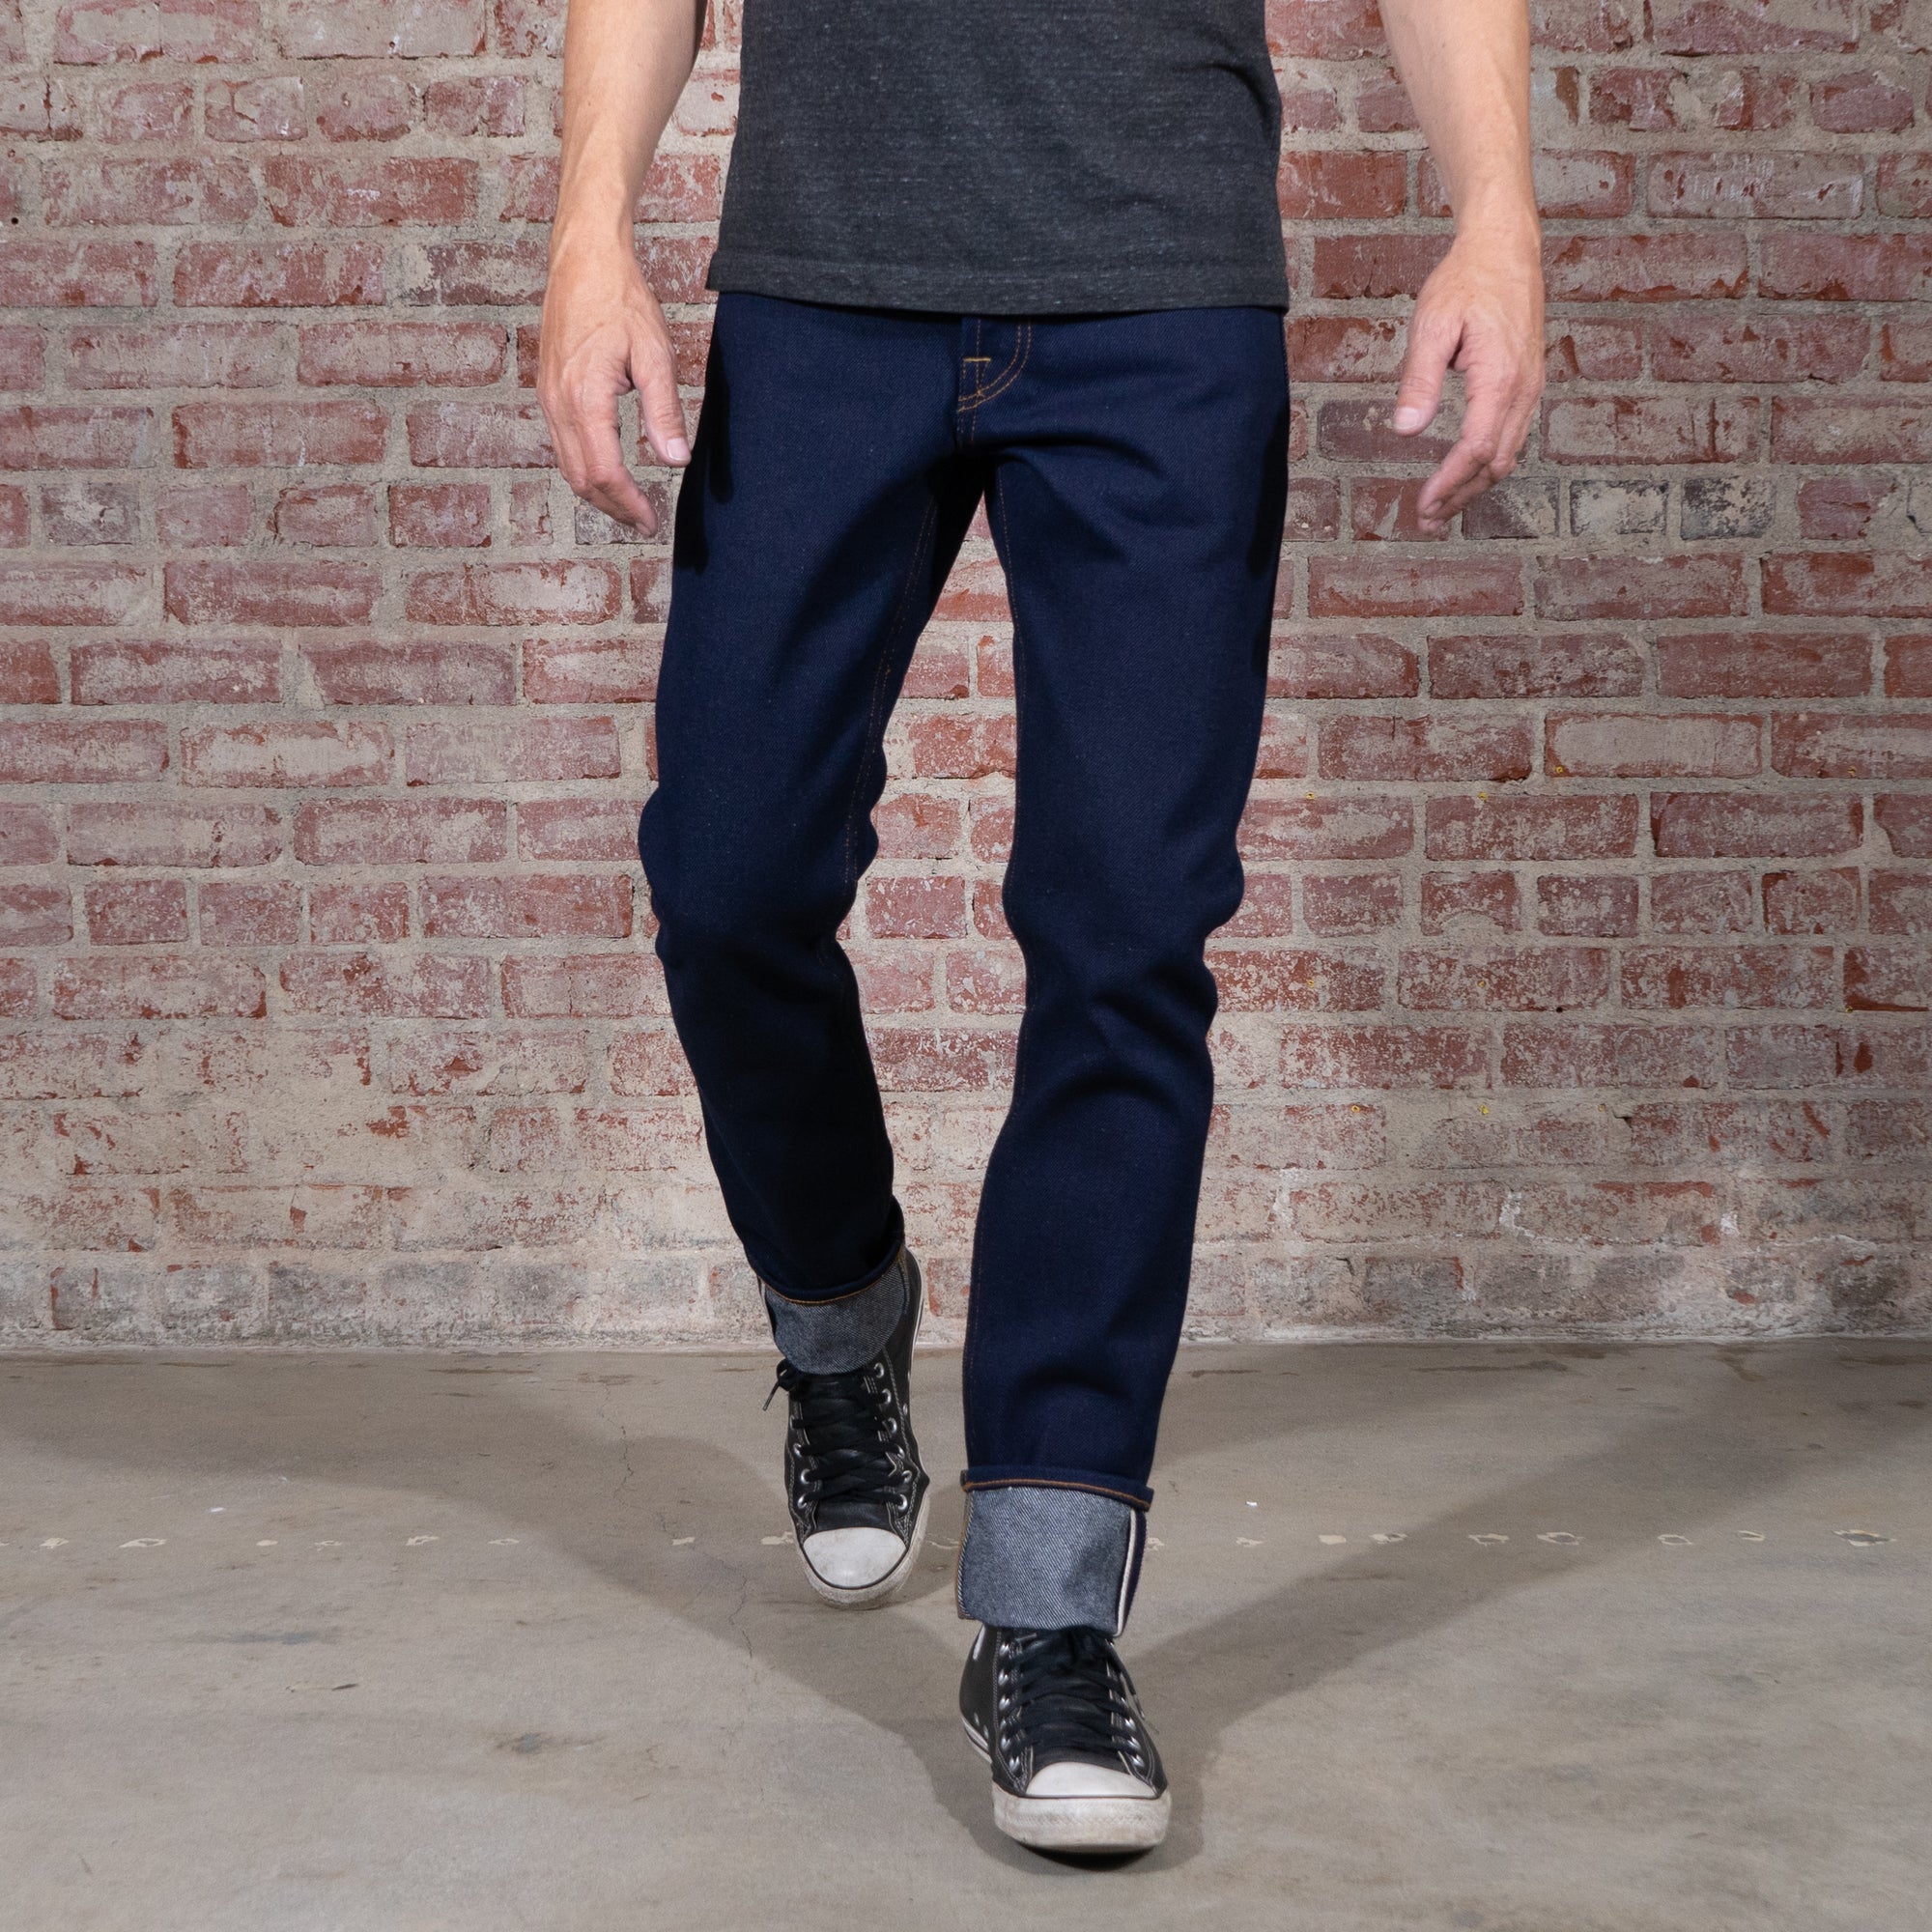 21.5 OZ JEANS - My Brave Star Selvage Review (100 Wears) | Stridewise